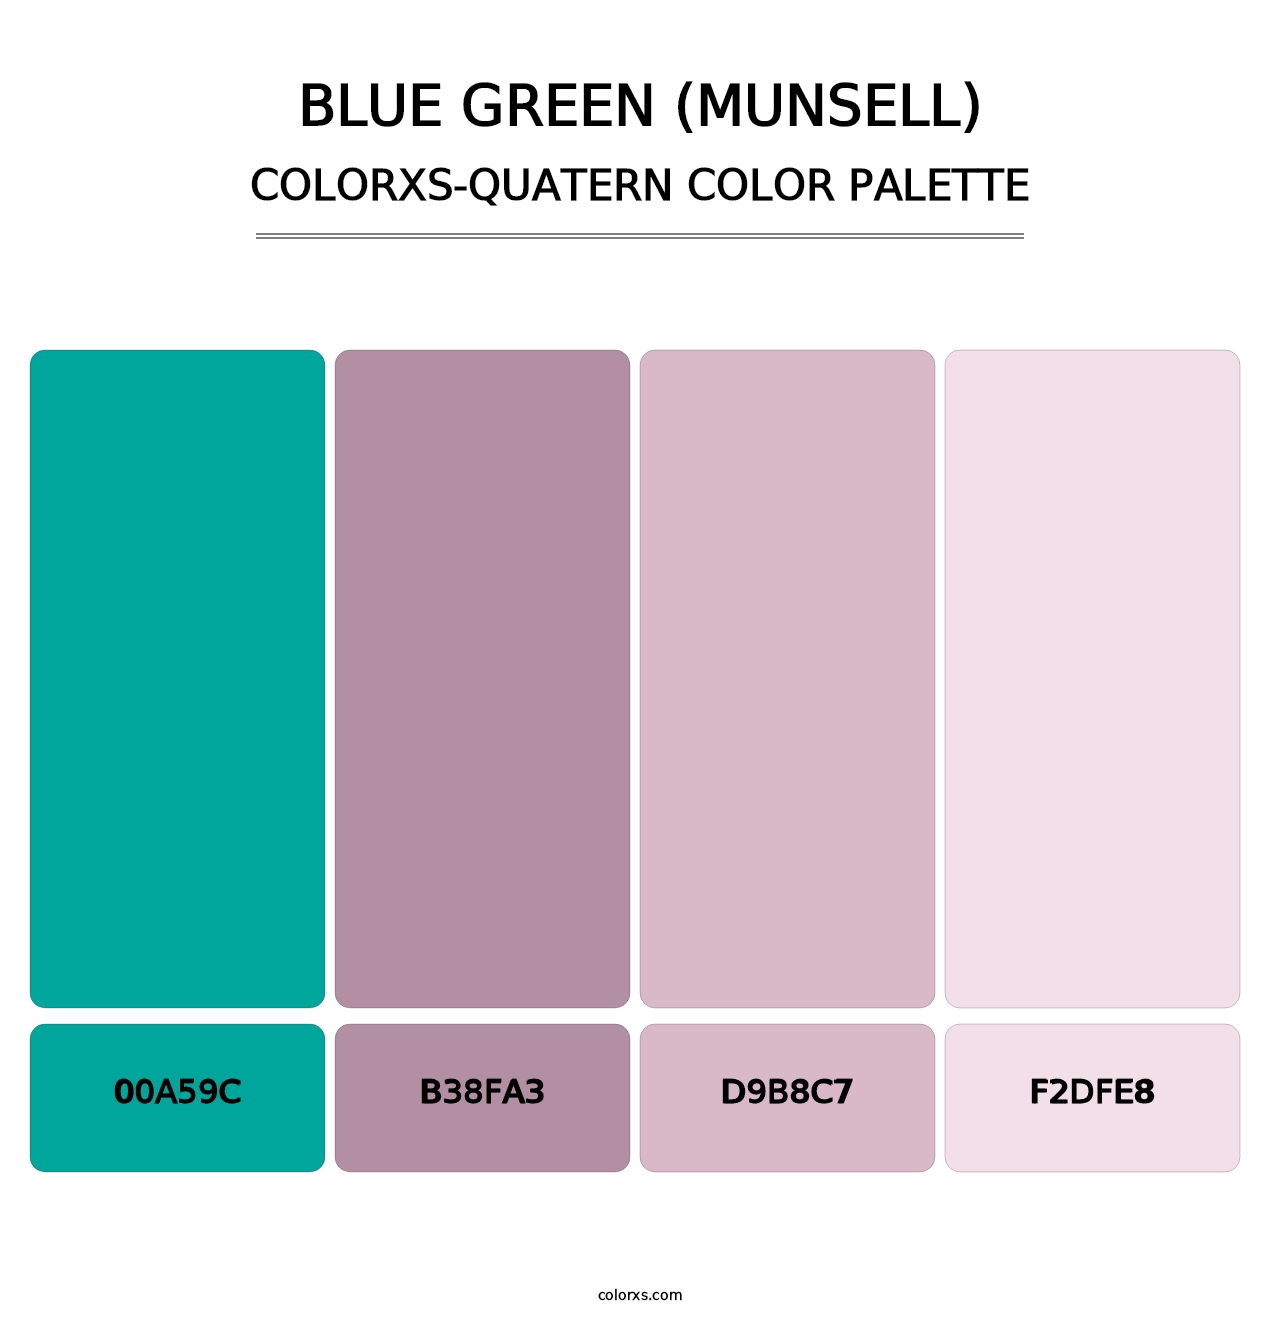 Blue Green (Munsell) - Colorxs Quatern Palette